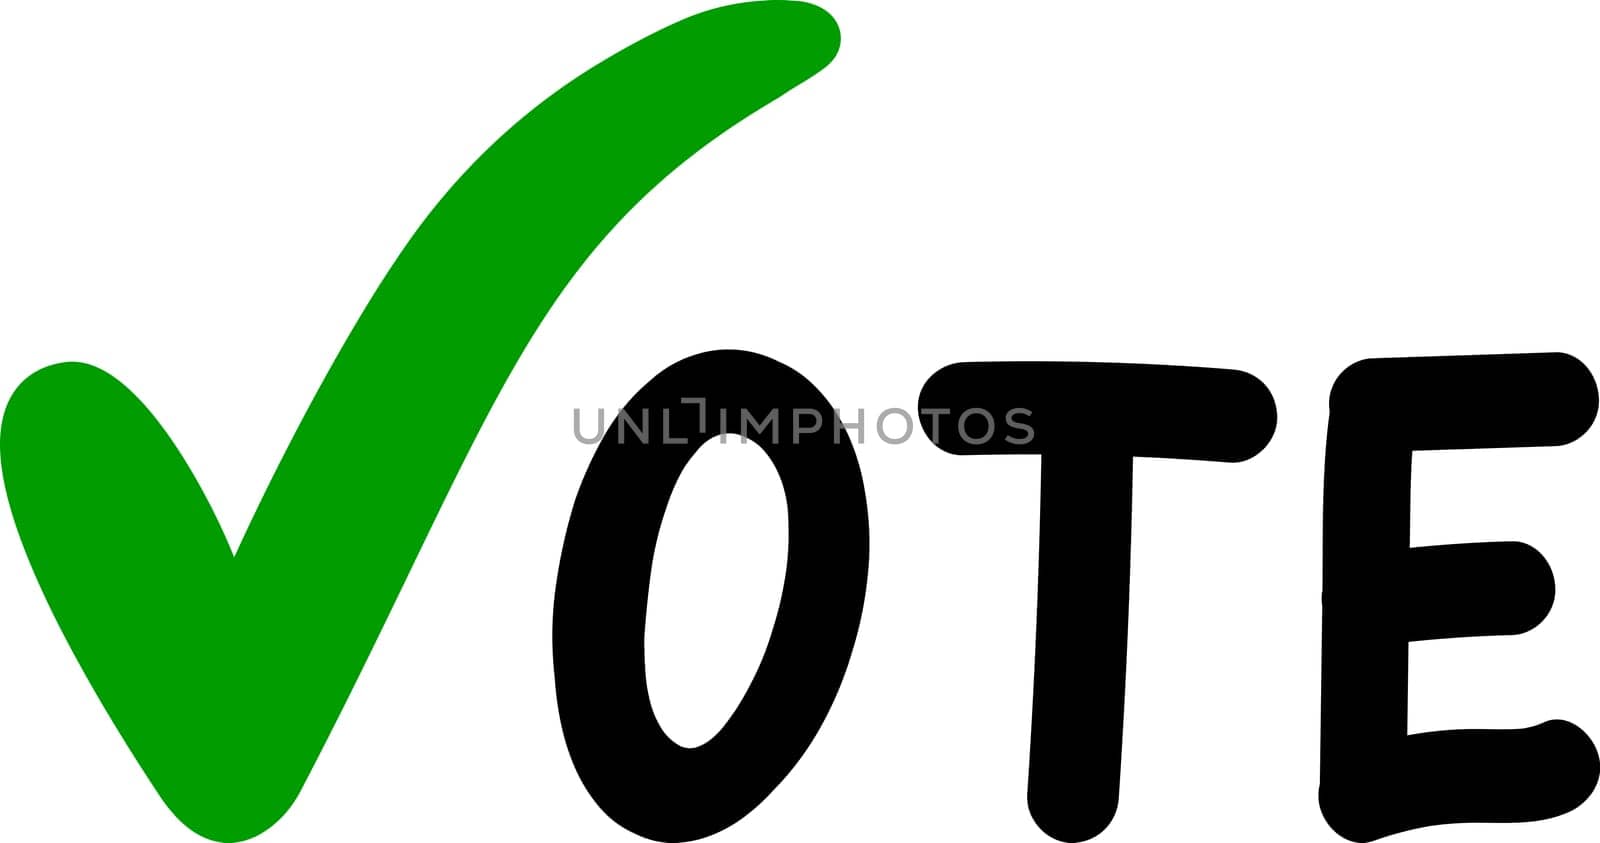 Voting Symbols hands design. Elections icons template.green check marks by koksikoks